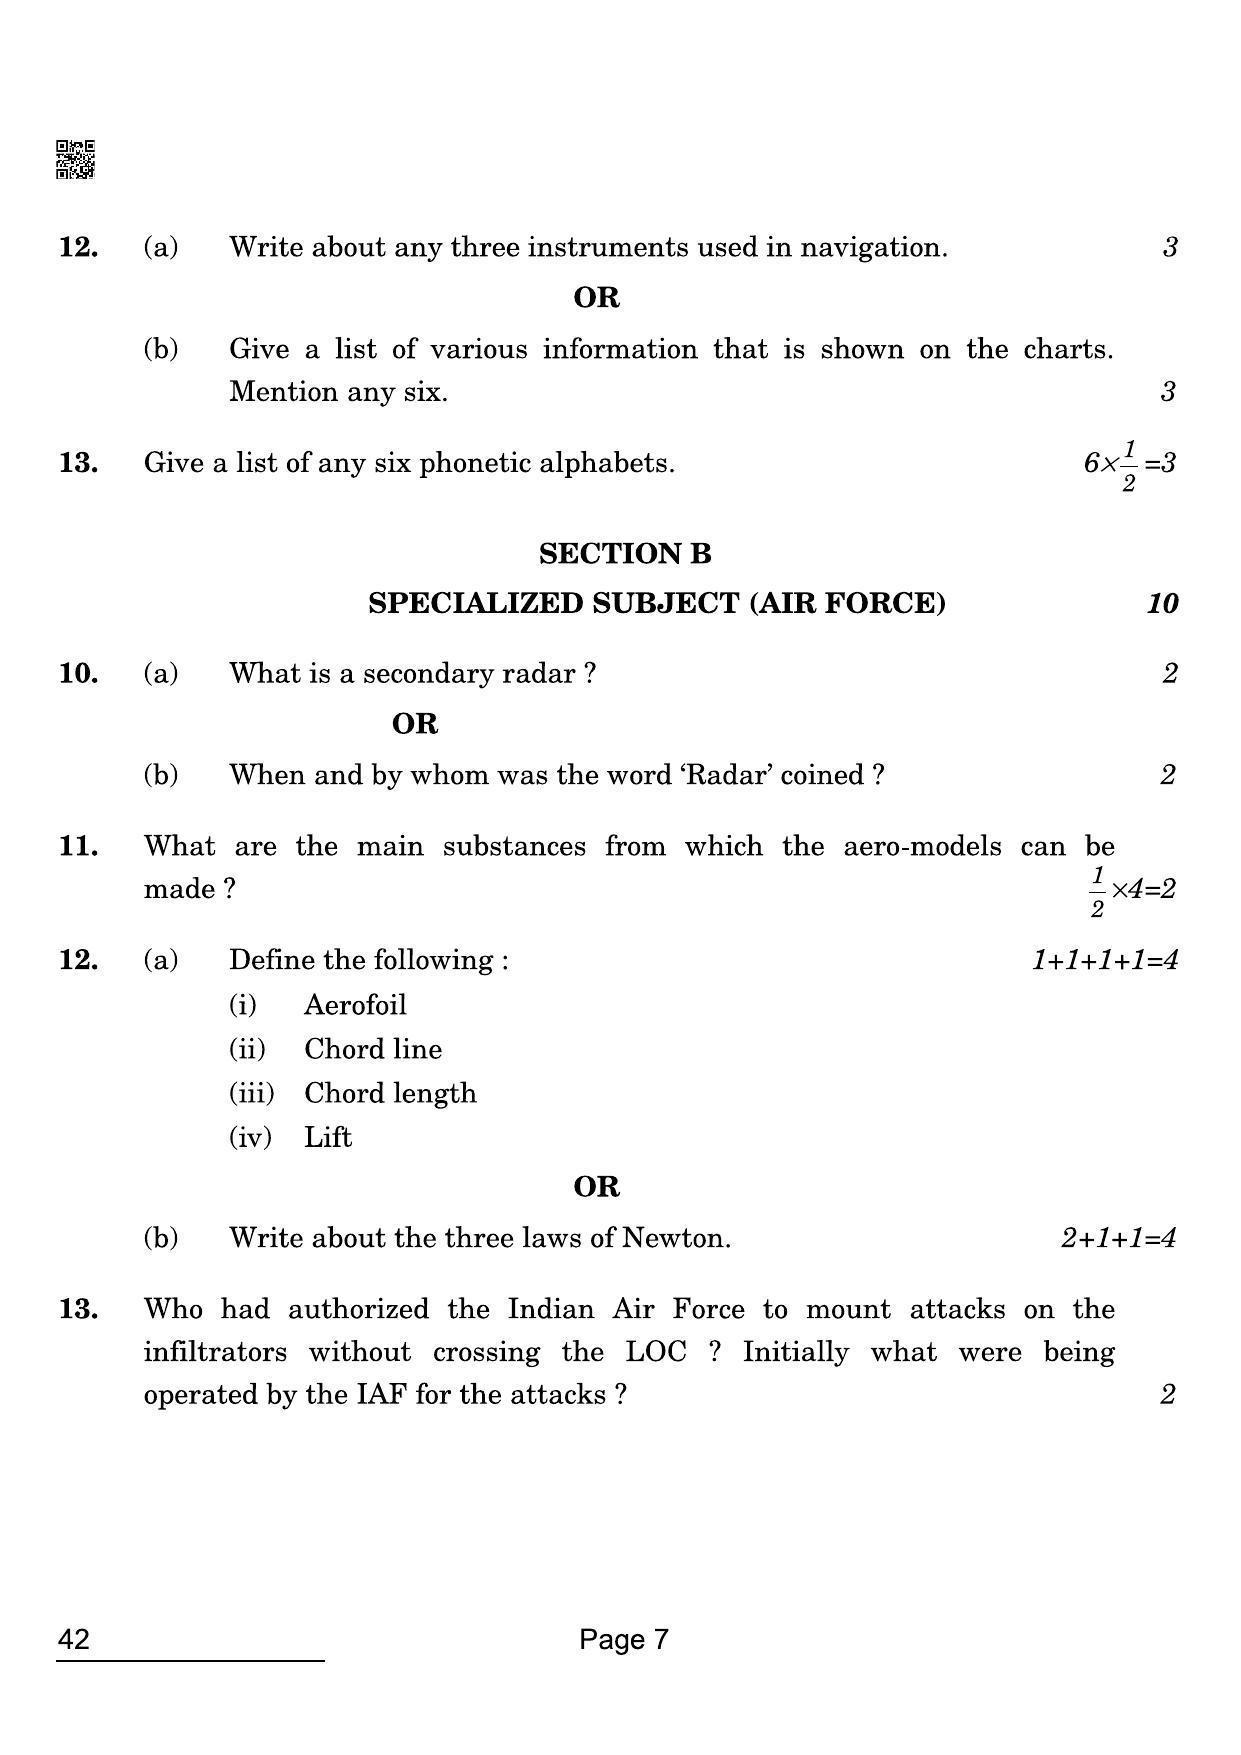 CBSE Class 12 42 NCC 2022 Compartment Question Paper - Page 7